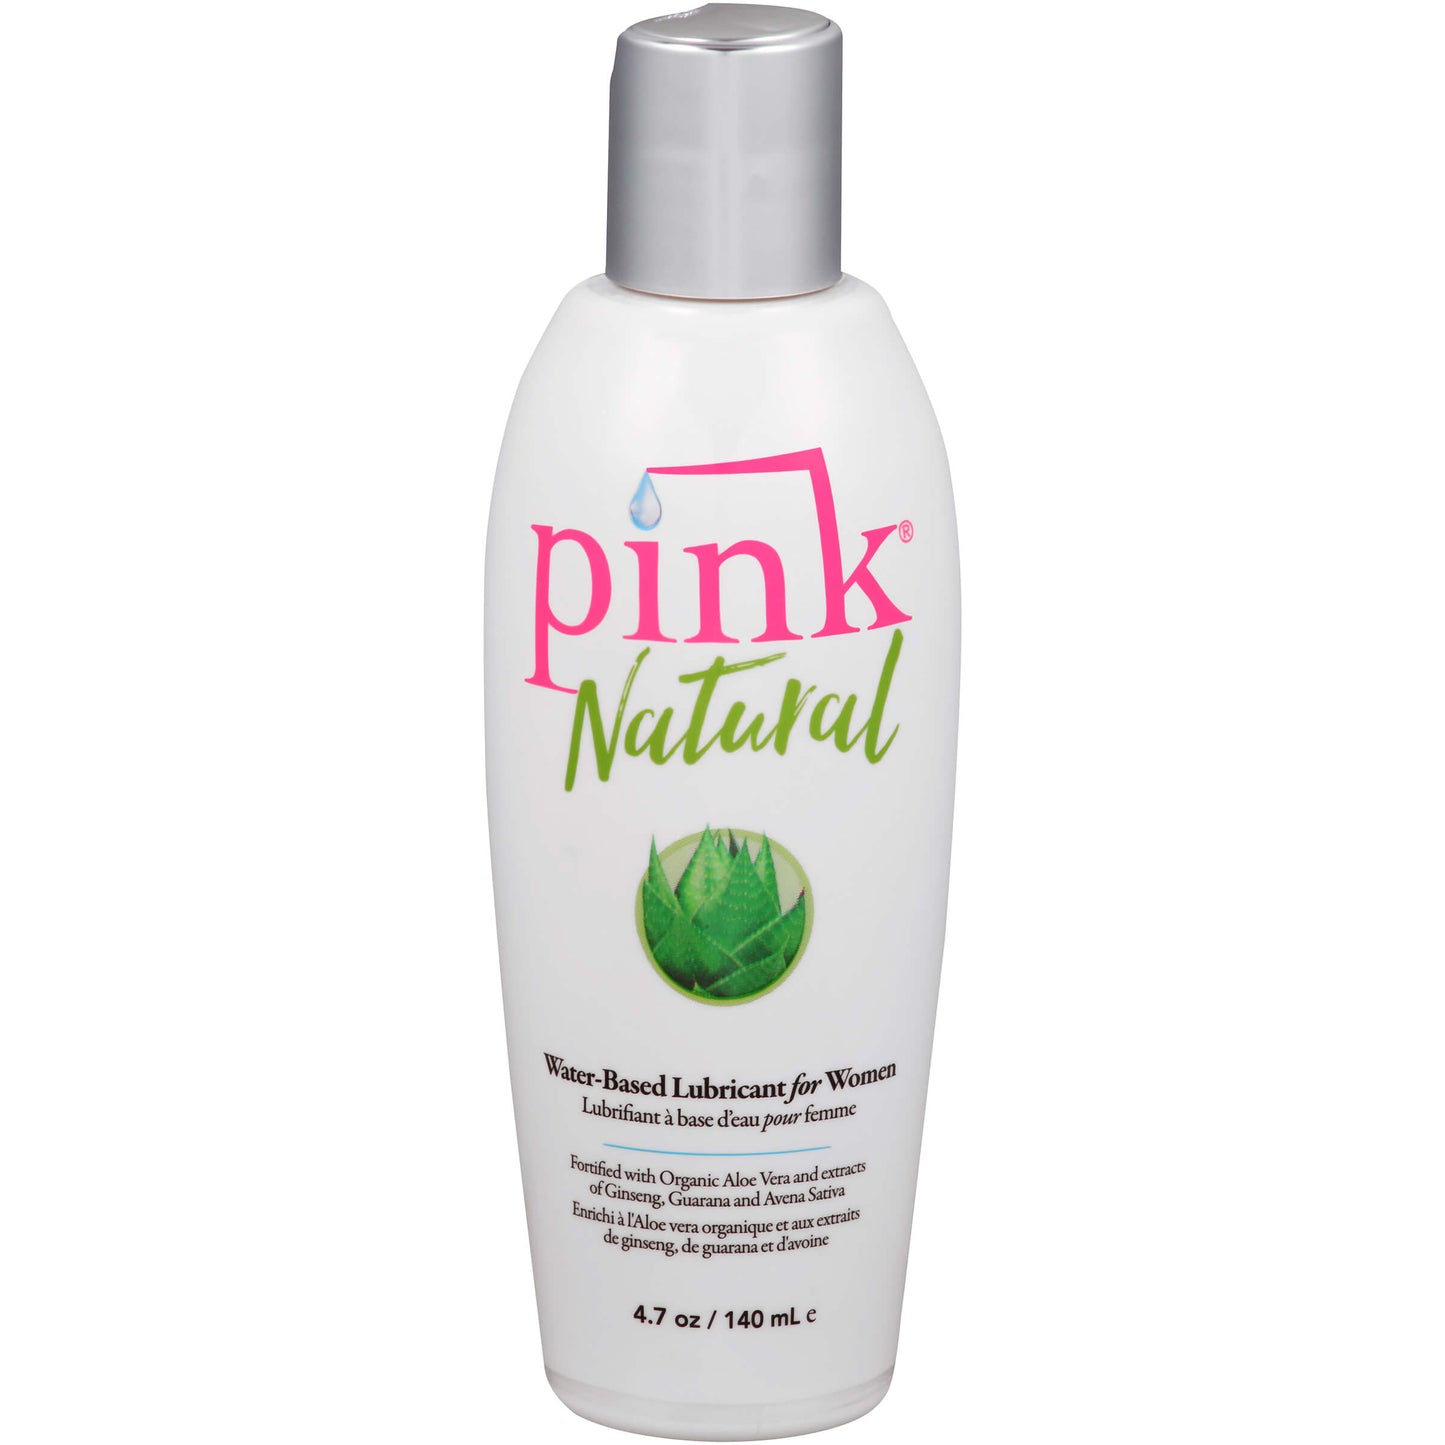 PINK Natural Water-Based Lubricant - The Bigger O - online sex toy shop USA, Canada & UK shipping available